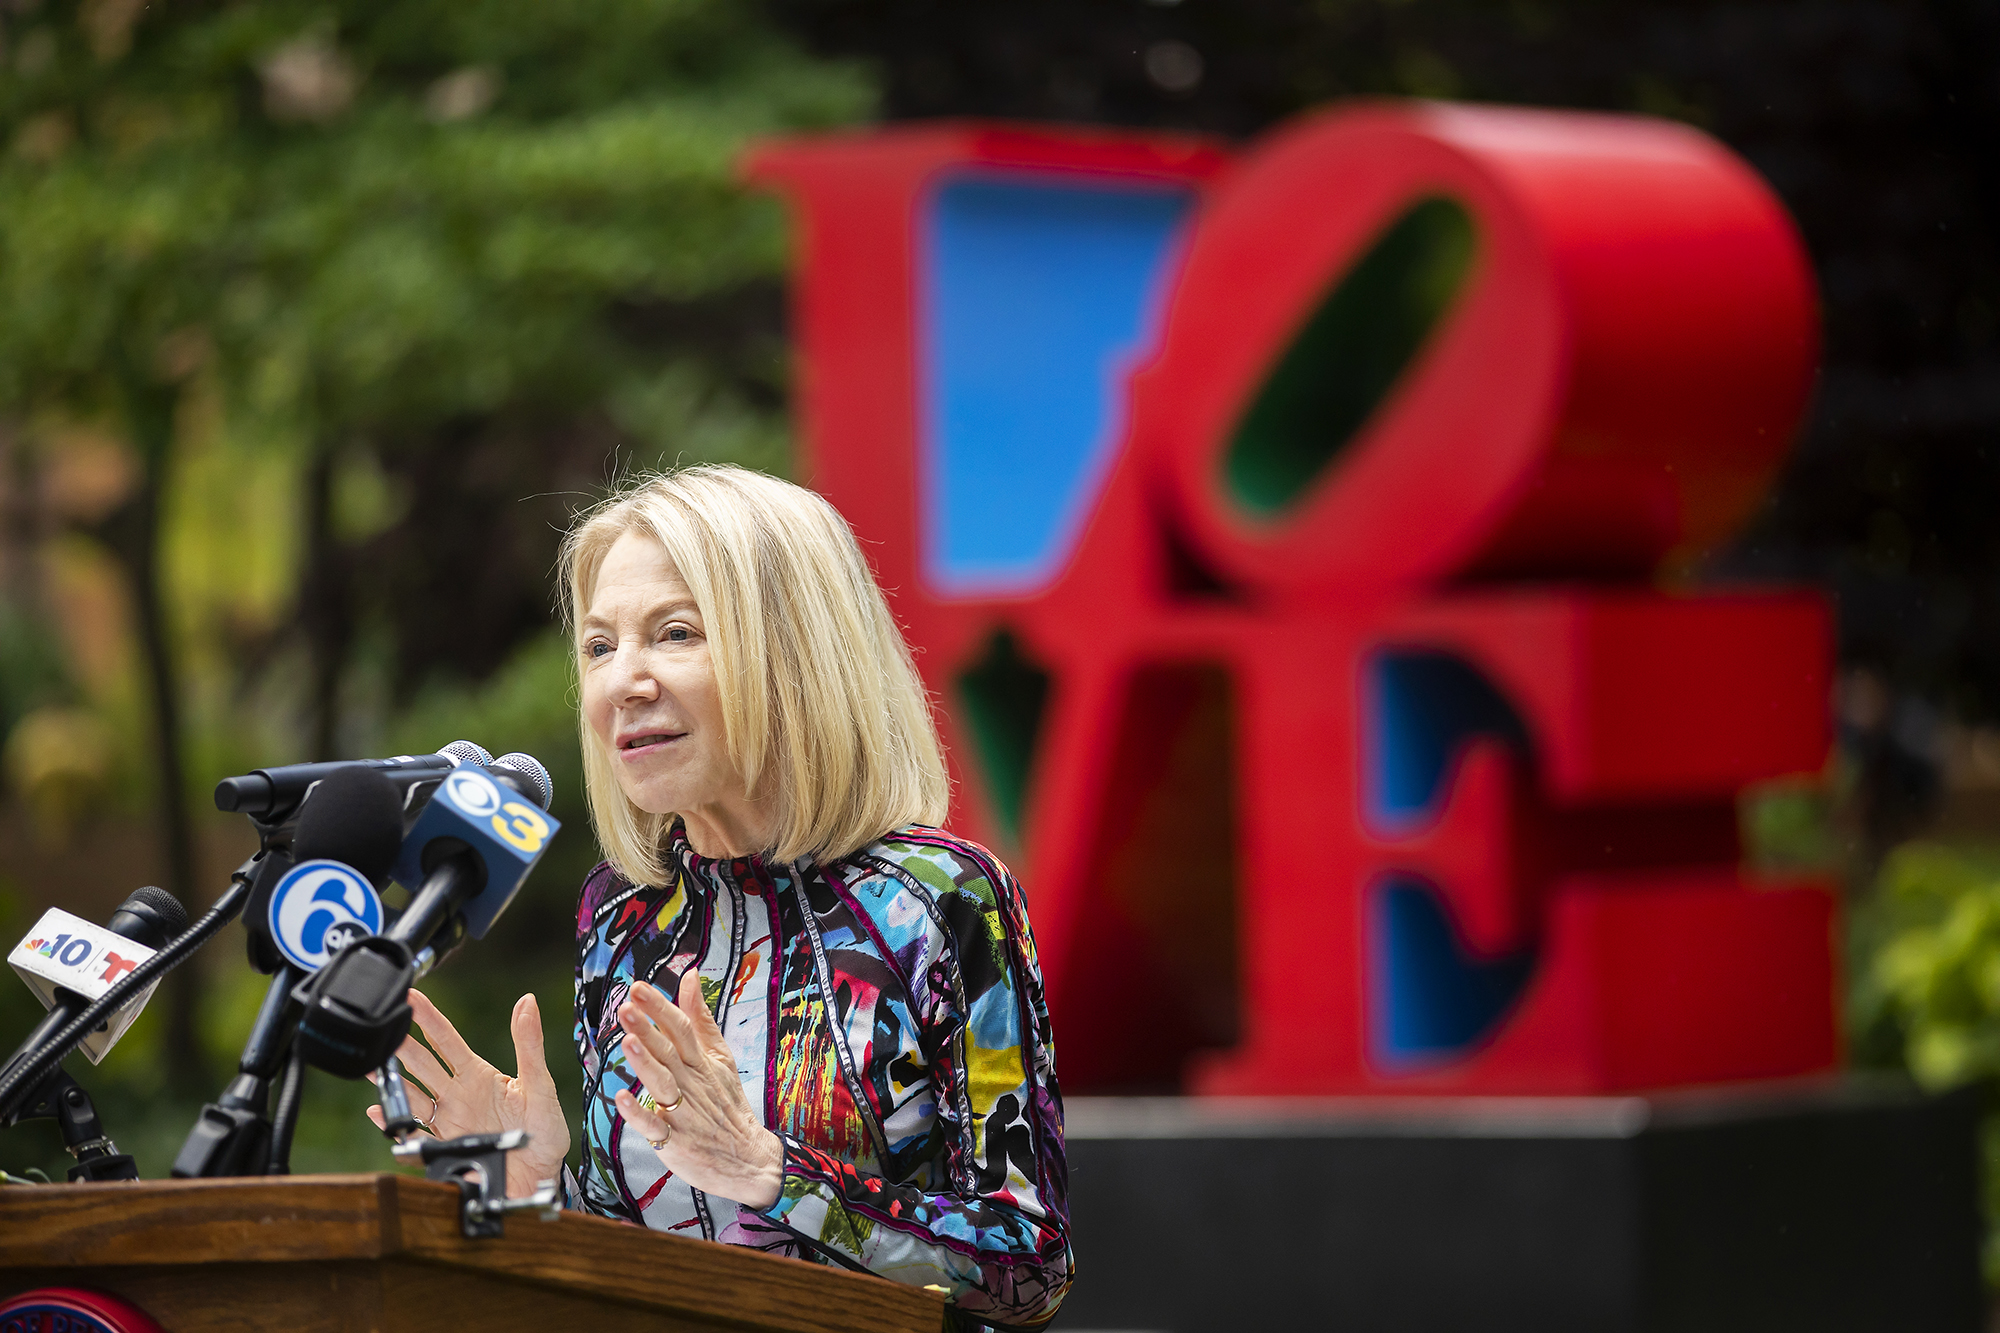 Amy Gutmann speaks at a podium in front of the LOVE statue on Penn’s campus.